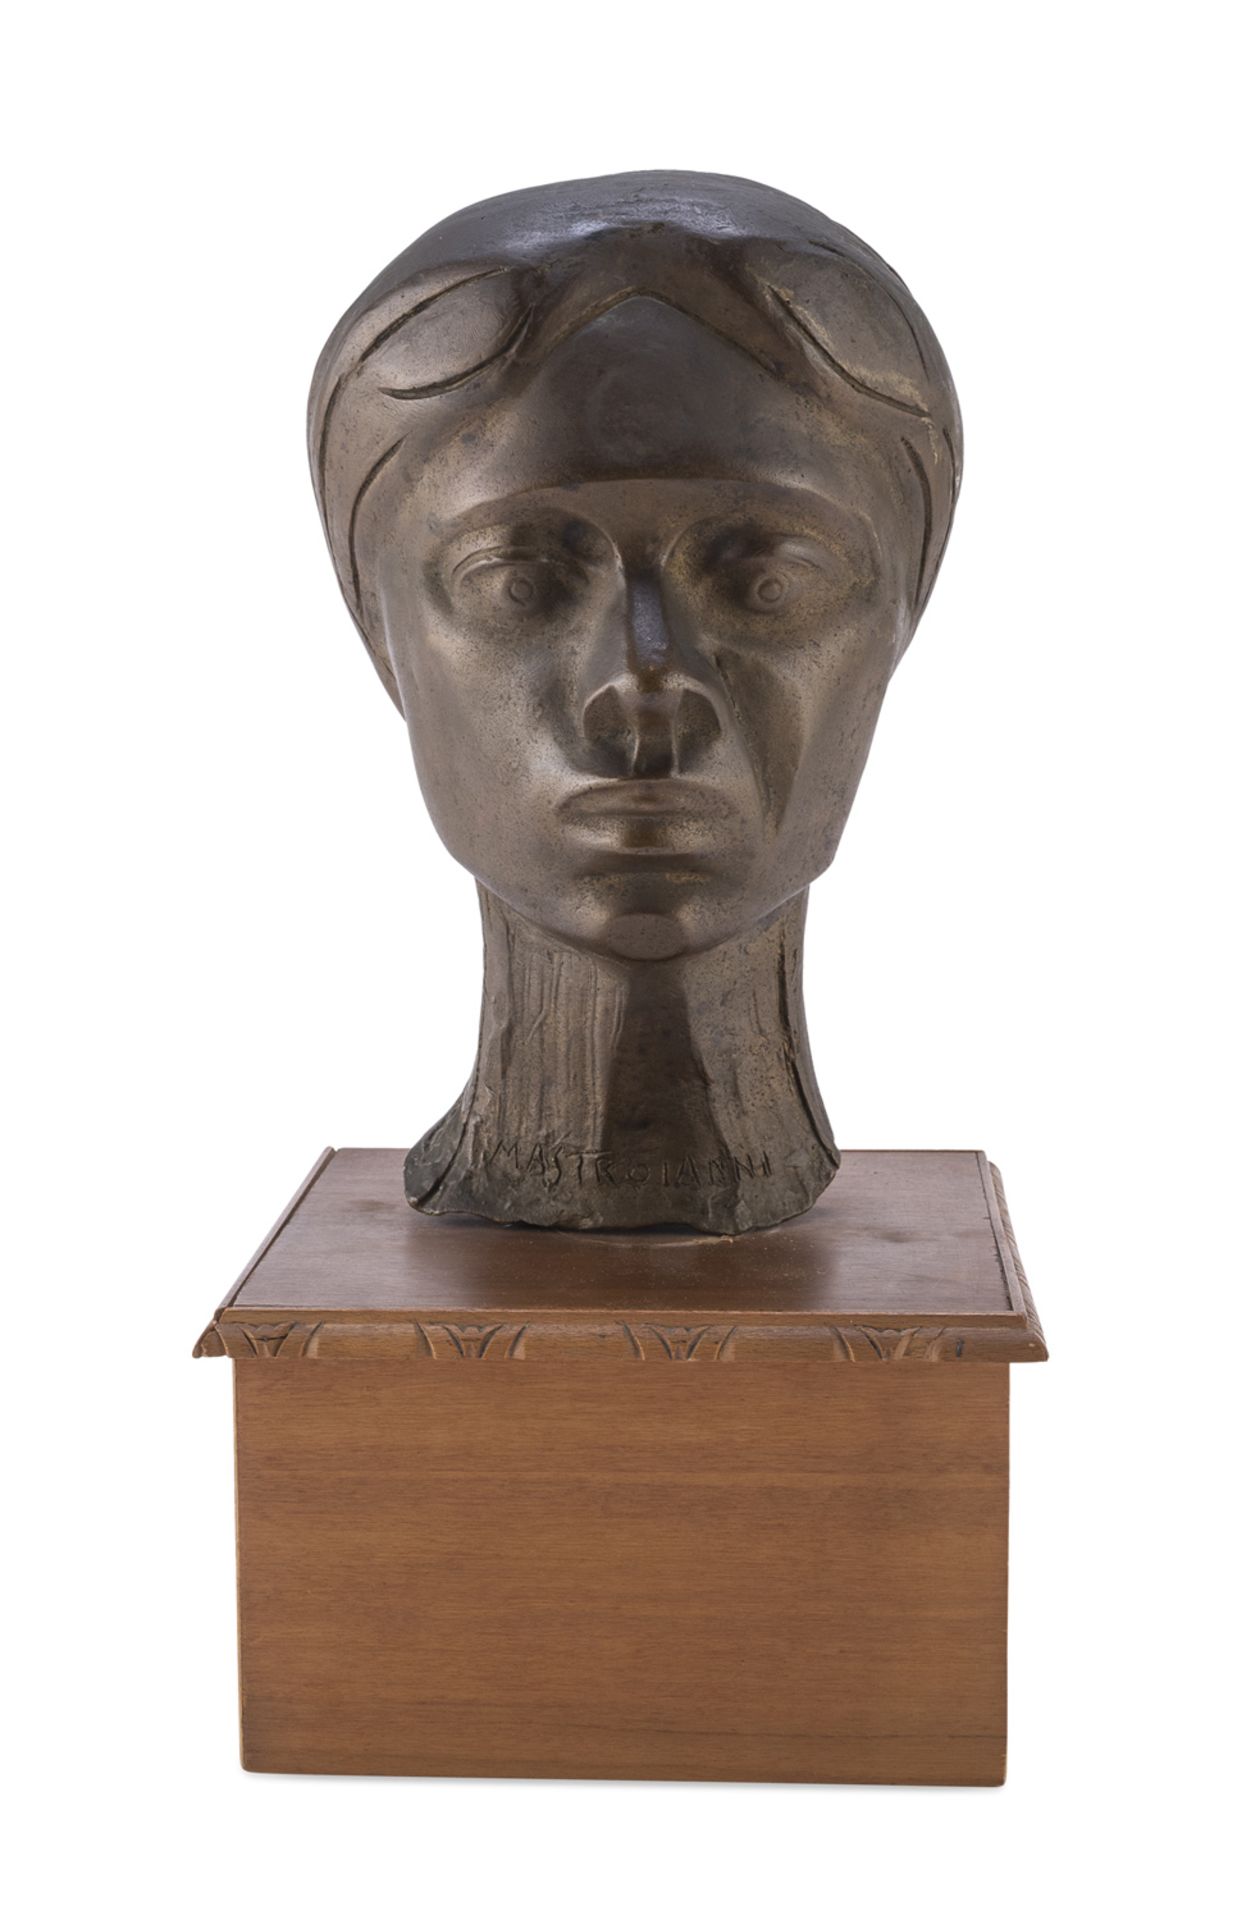 BRONZE SCULPTURE OF A WOMAN BY UMBERTO MASTROIANNI (1910-1996)